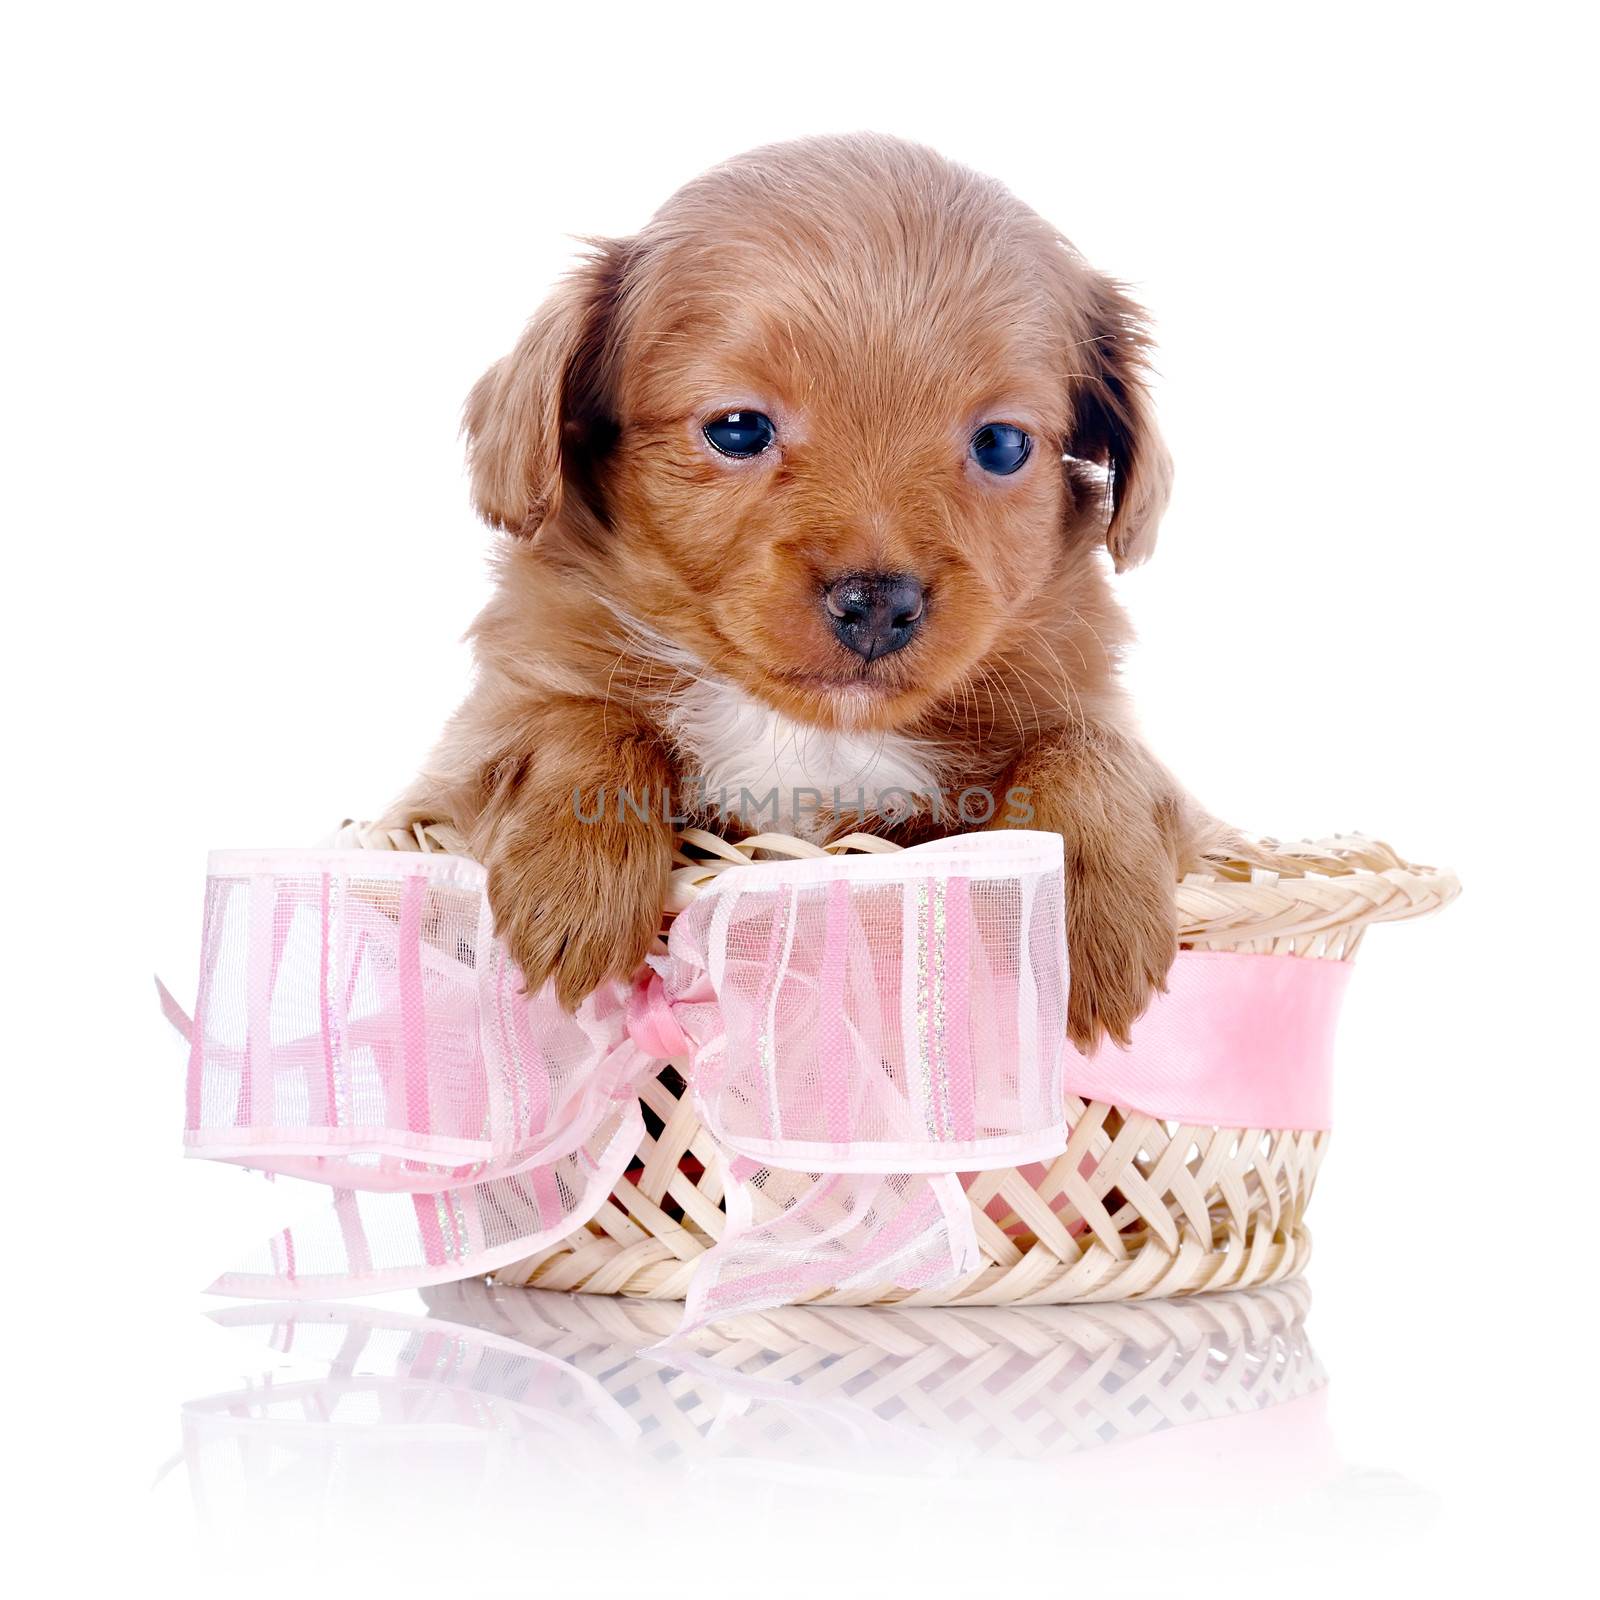 Puppy in a basket. Puppy in a wattled basket with a bow. Puppy of a decorative doggie. Decorative dog. Puppy of the Petersburg orchid on a white background